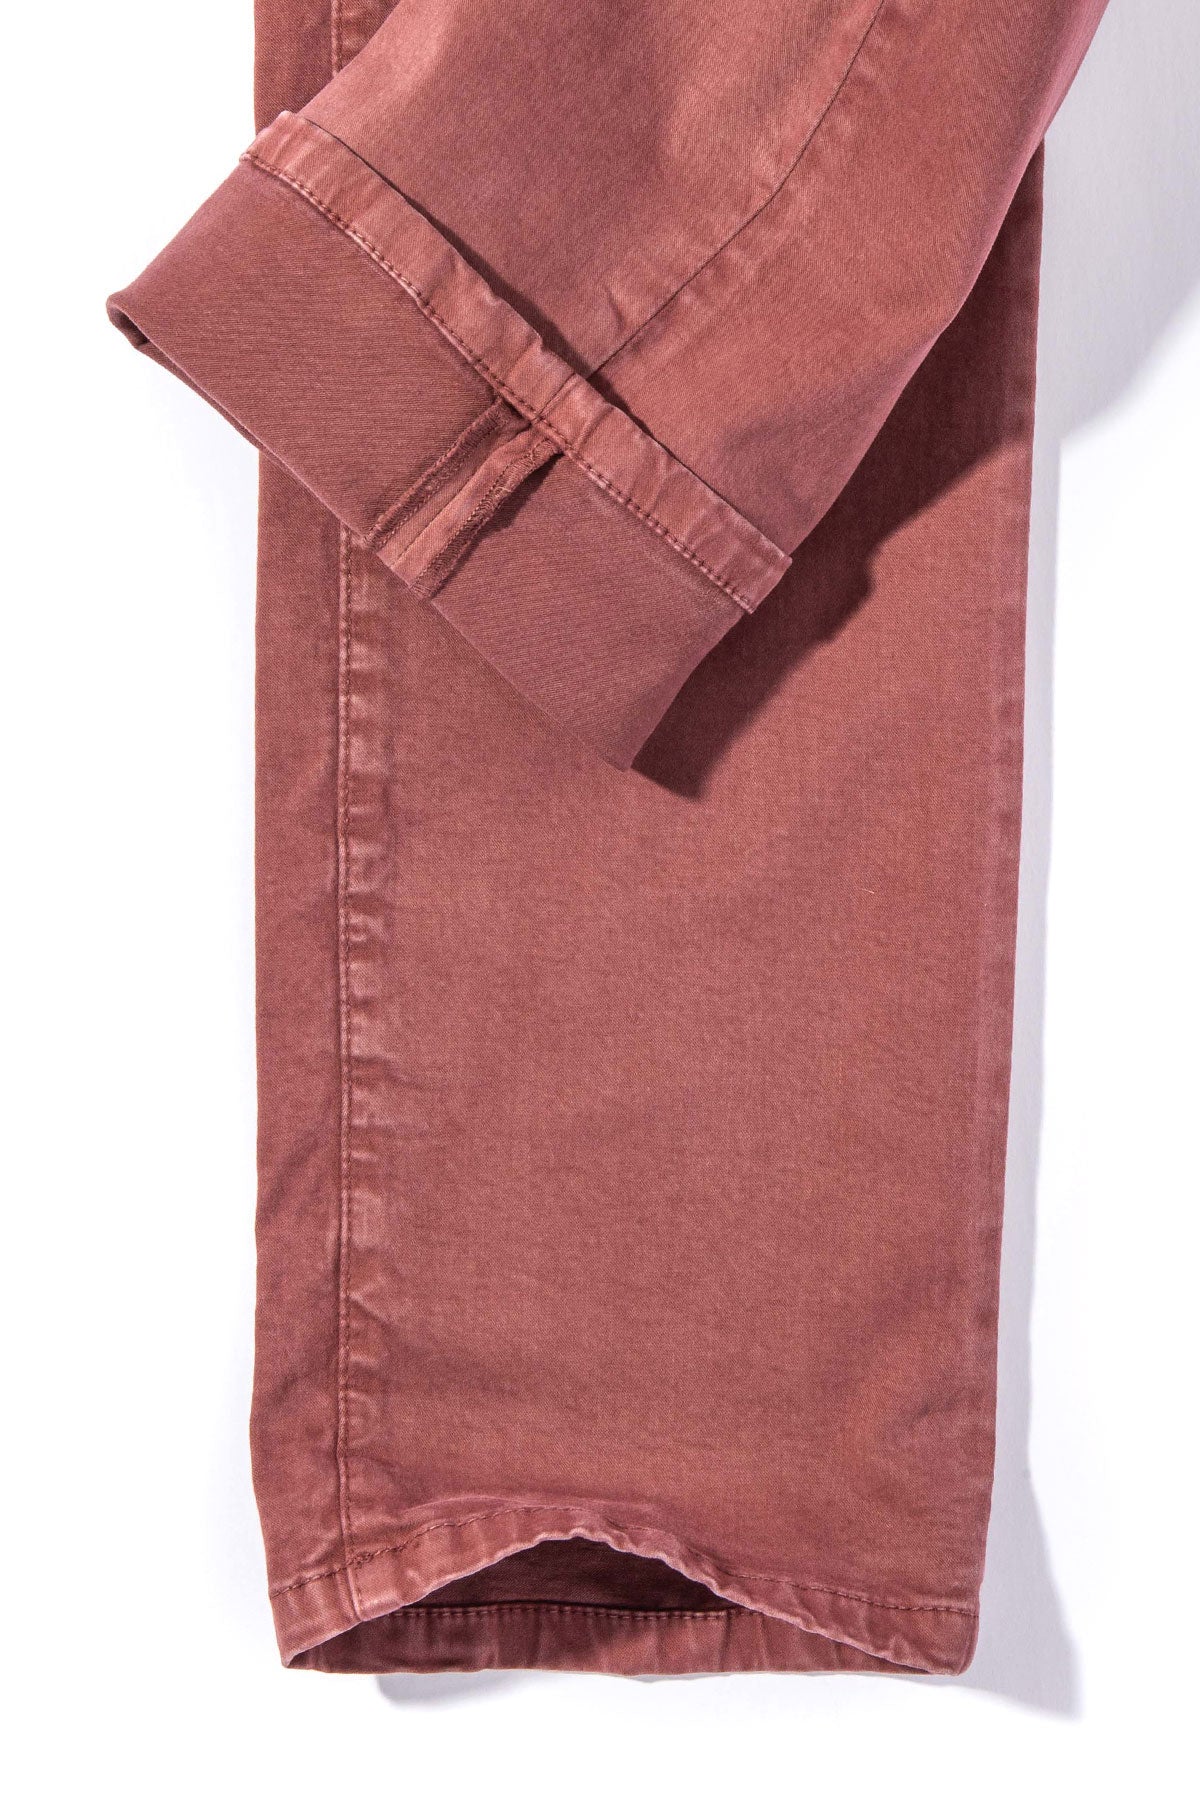 Ryland Rugged Soft Touch Cotton Jeans in Arancio | Mens - Pants - 5 Pocket | Teleria Zed